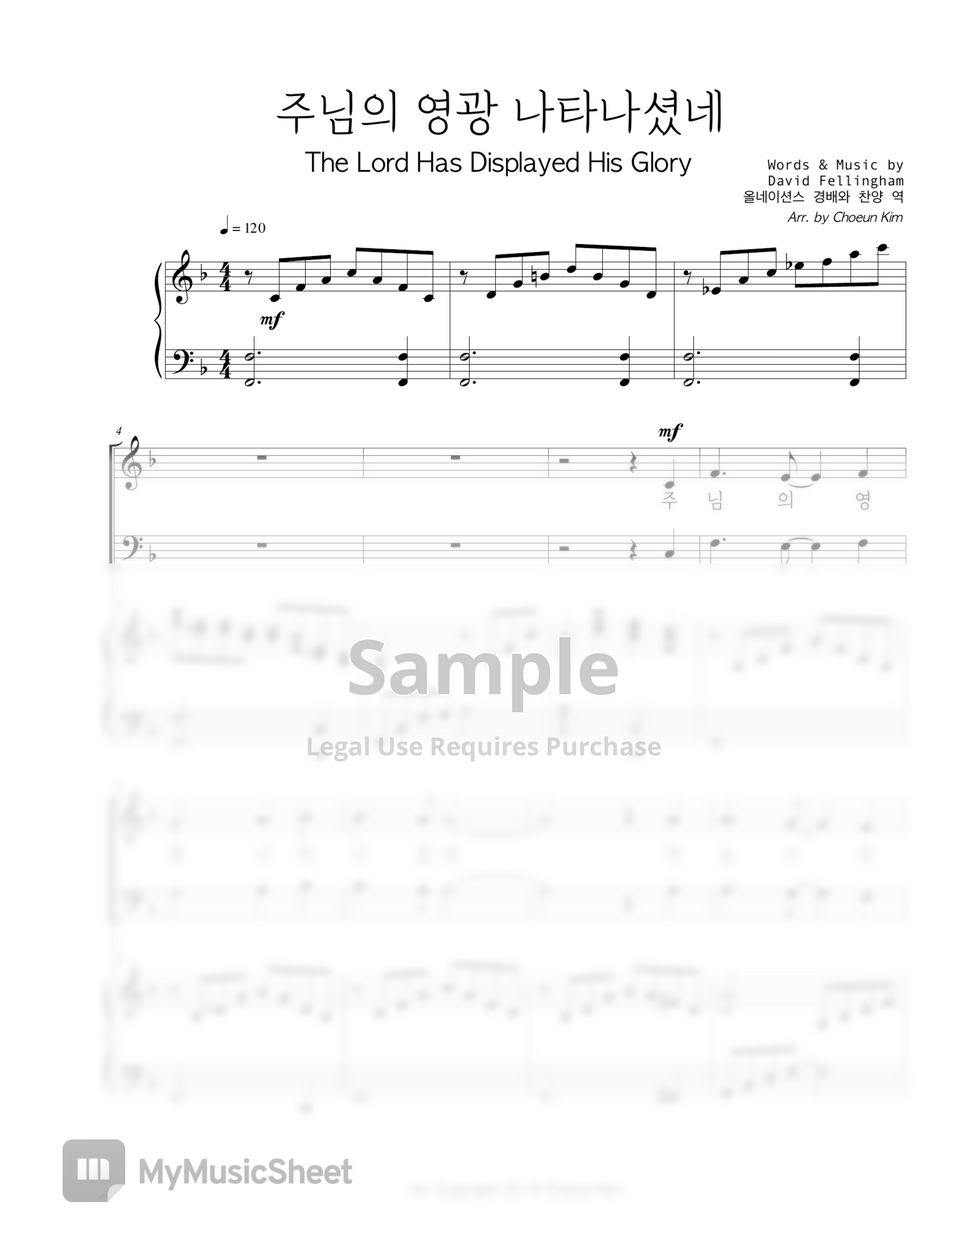 David Fellingham - The Lord Has Displayed His Glory (Choir) by MusicCho